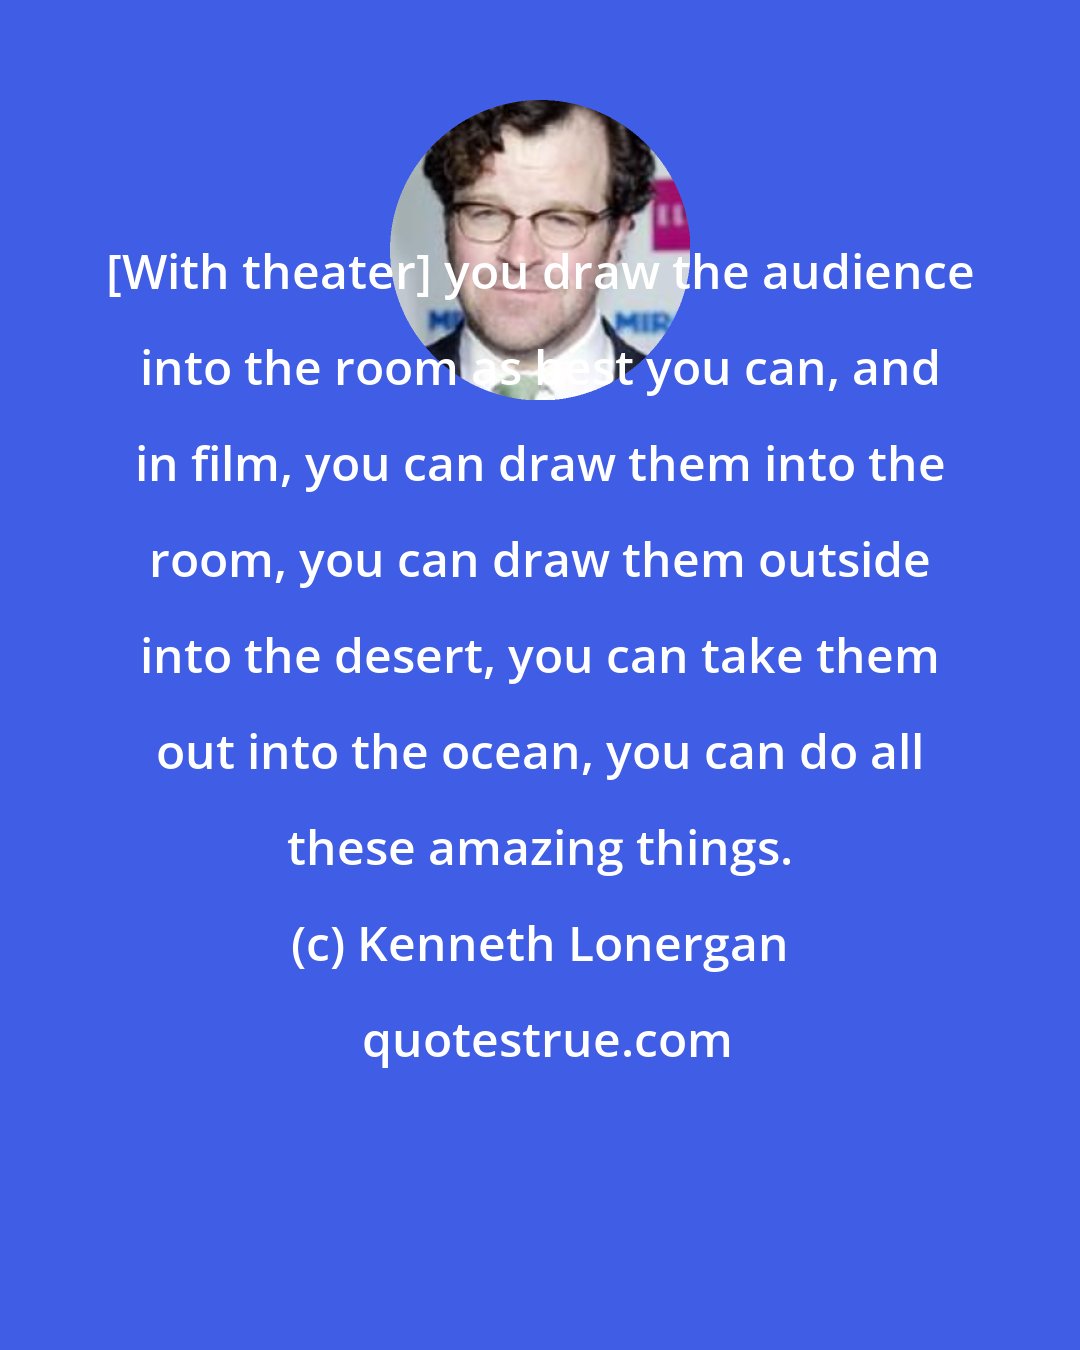 Kenneth Lonergan: [With theater] you draw the audience into the room as best you can, and in film, you can draw them into the room, you can draw them outside into the desert, you can take them out into the ocean, you can do all these amazing things.